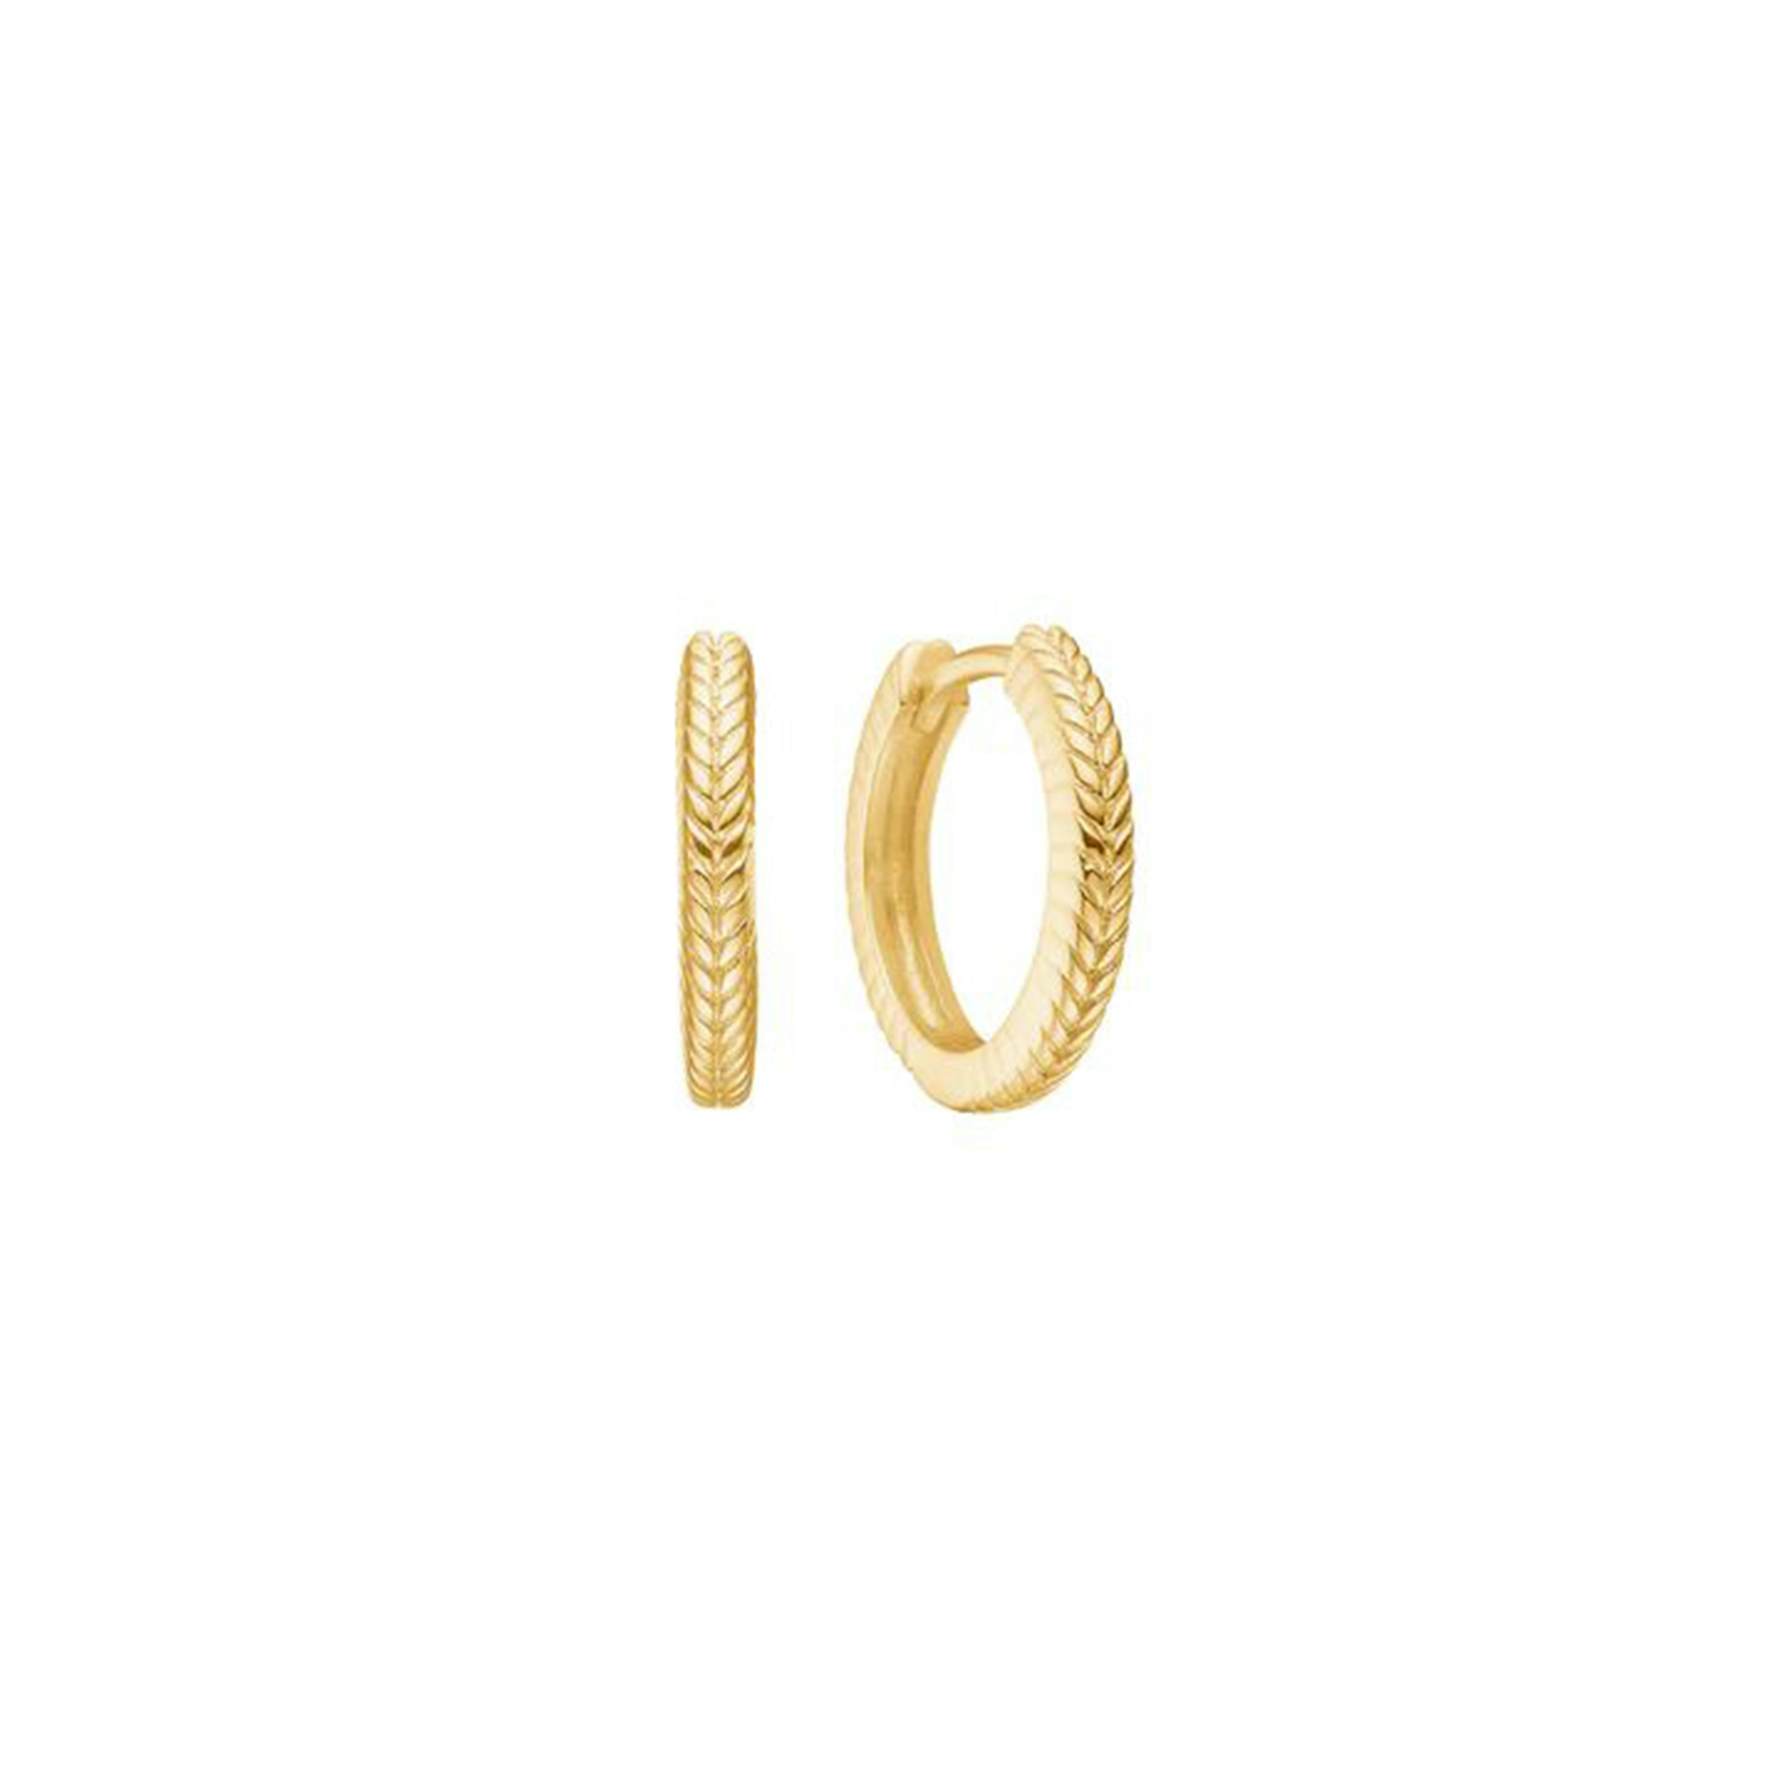 Fishbone Hoop from Carré in Goldplated-Silver Sterling 925